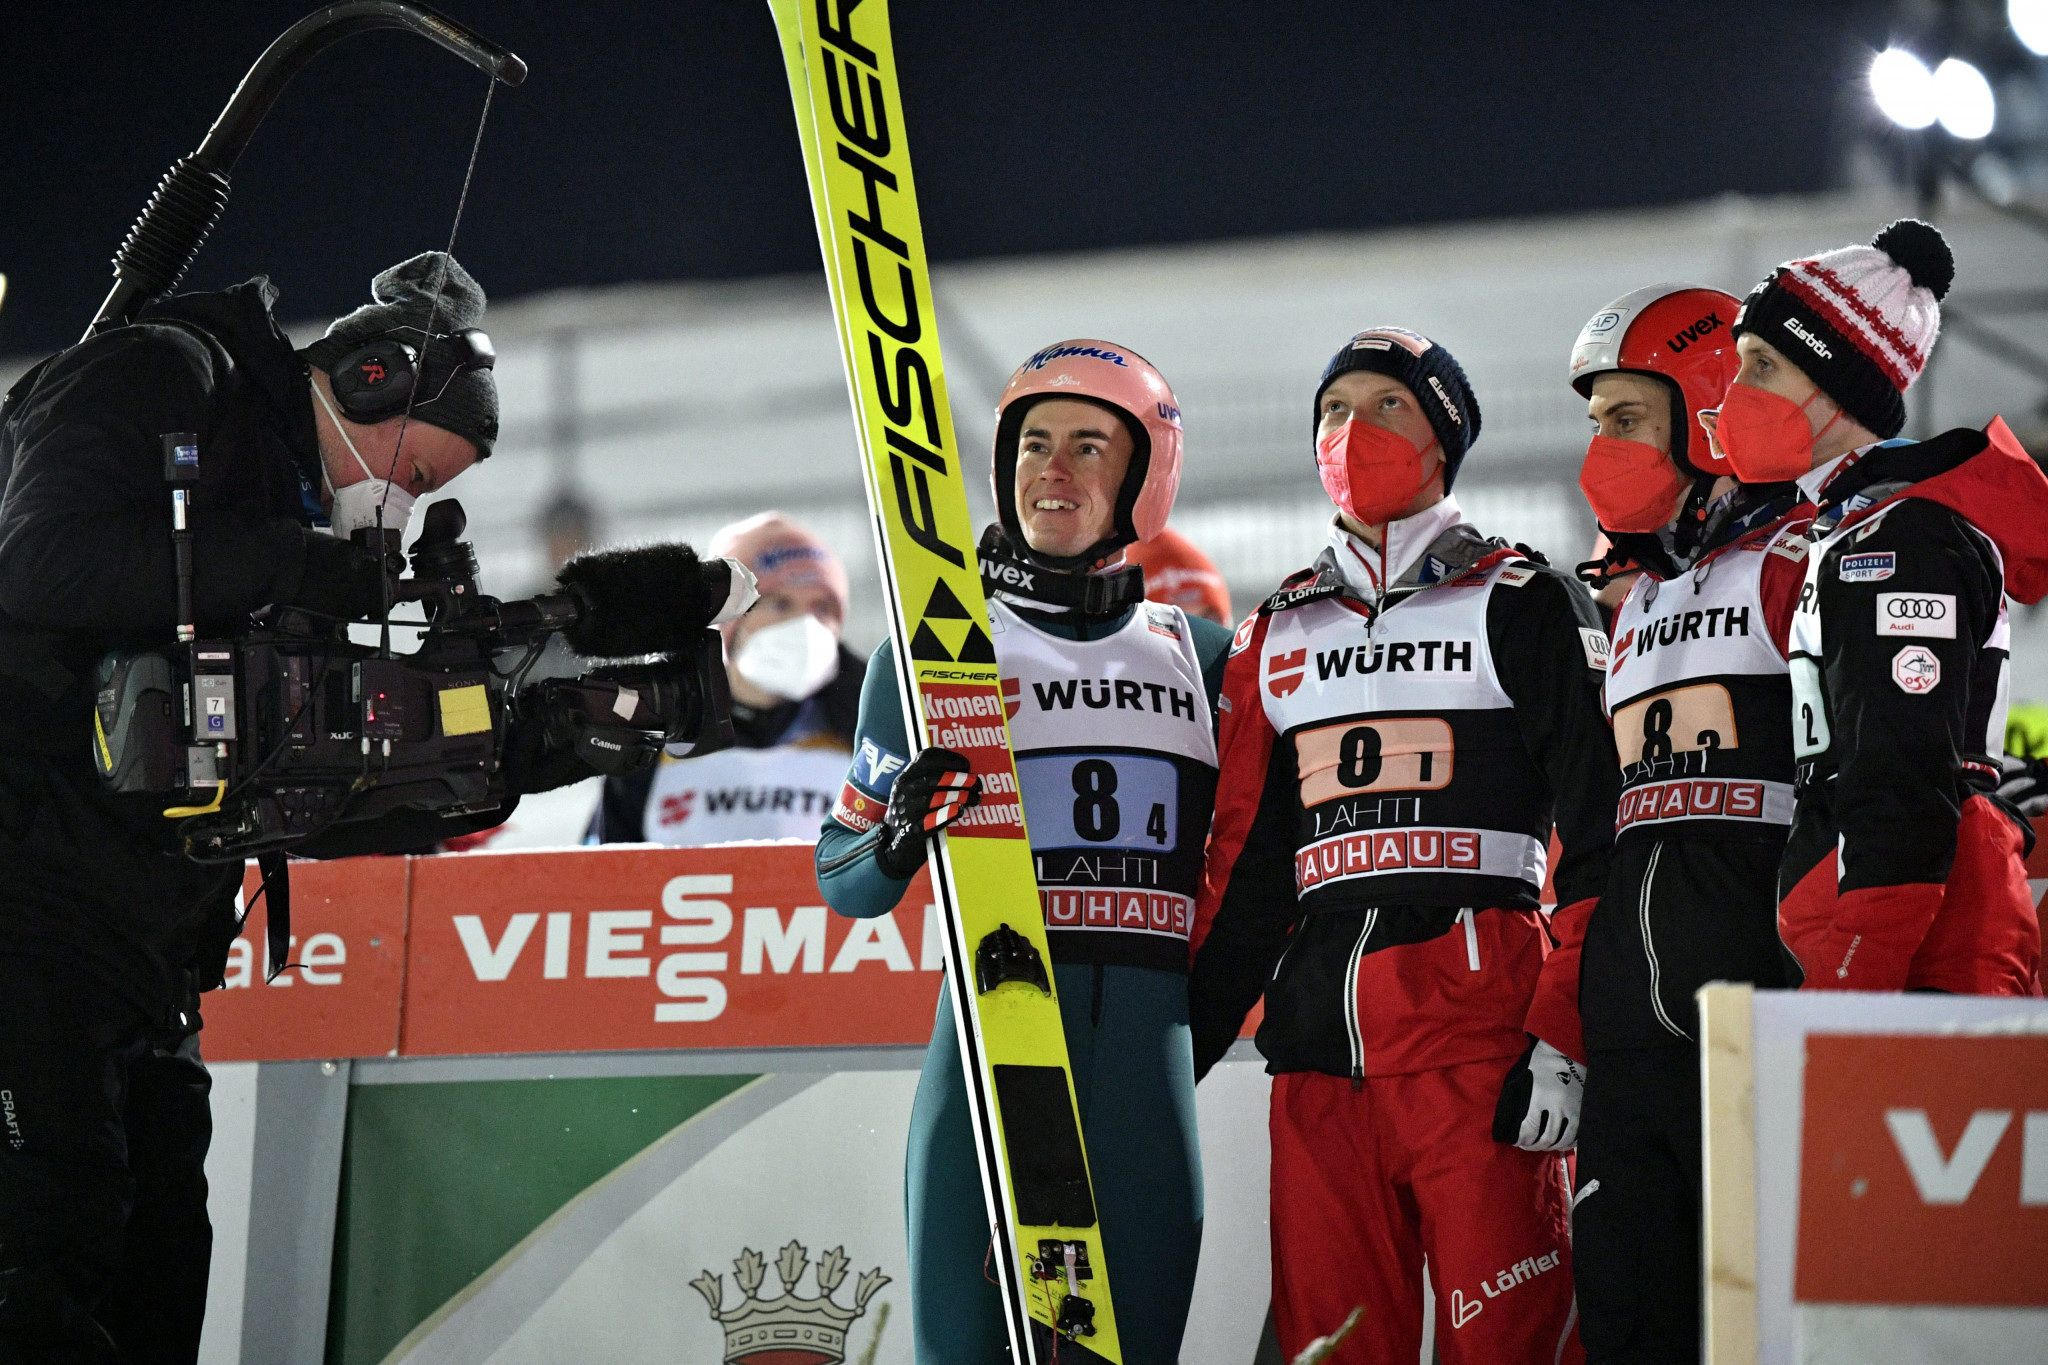 Austria triumphed in the men's team event at the FIS Ski Jumping World Cup in Lahti ©Getty Images